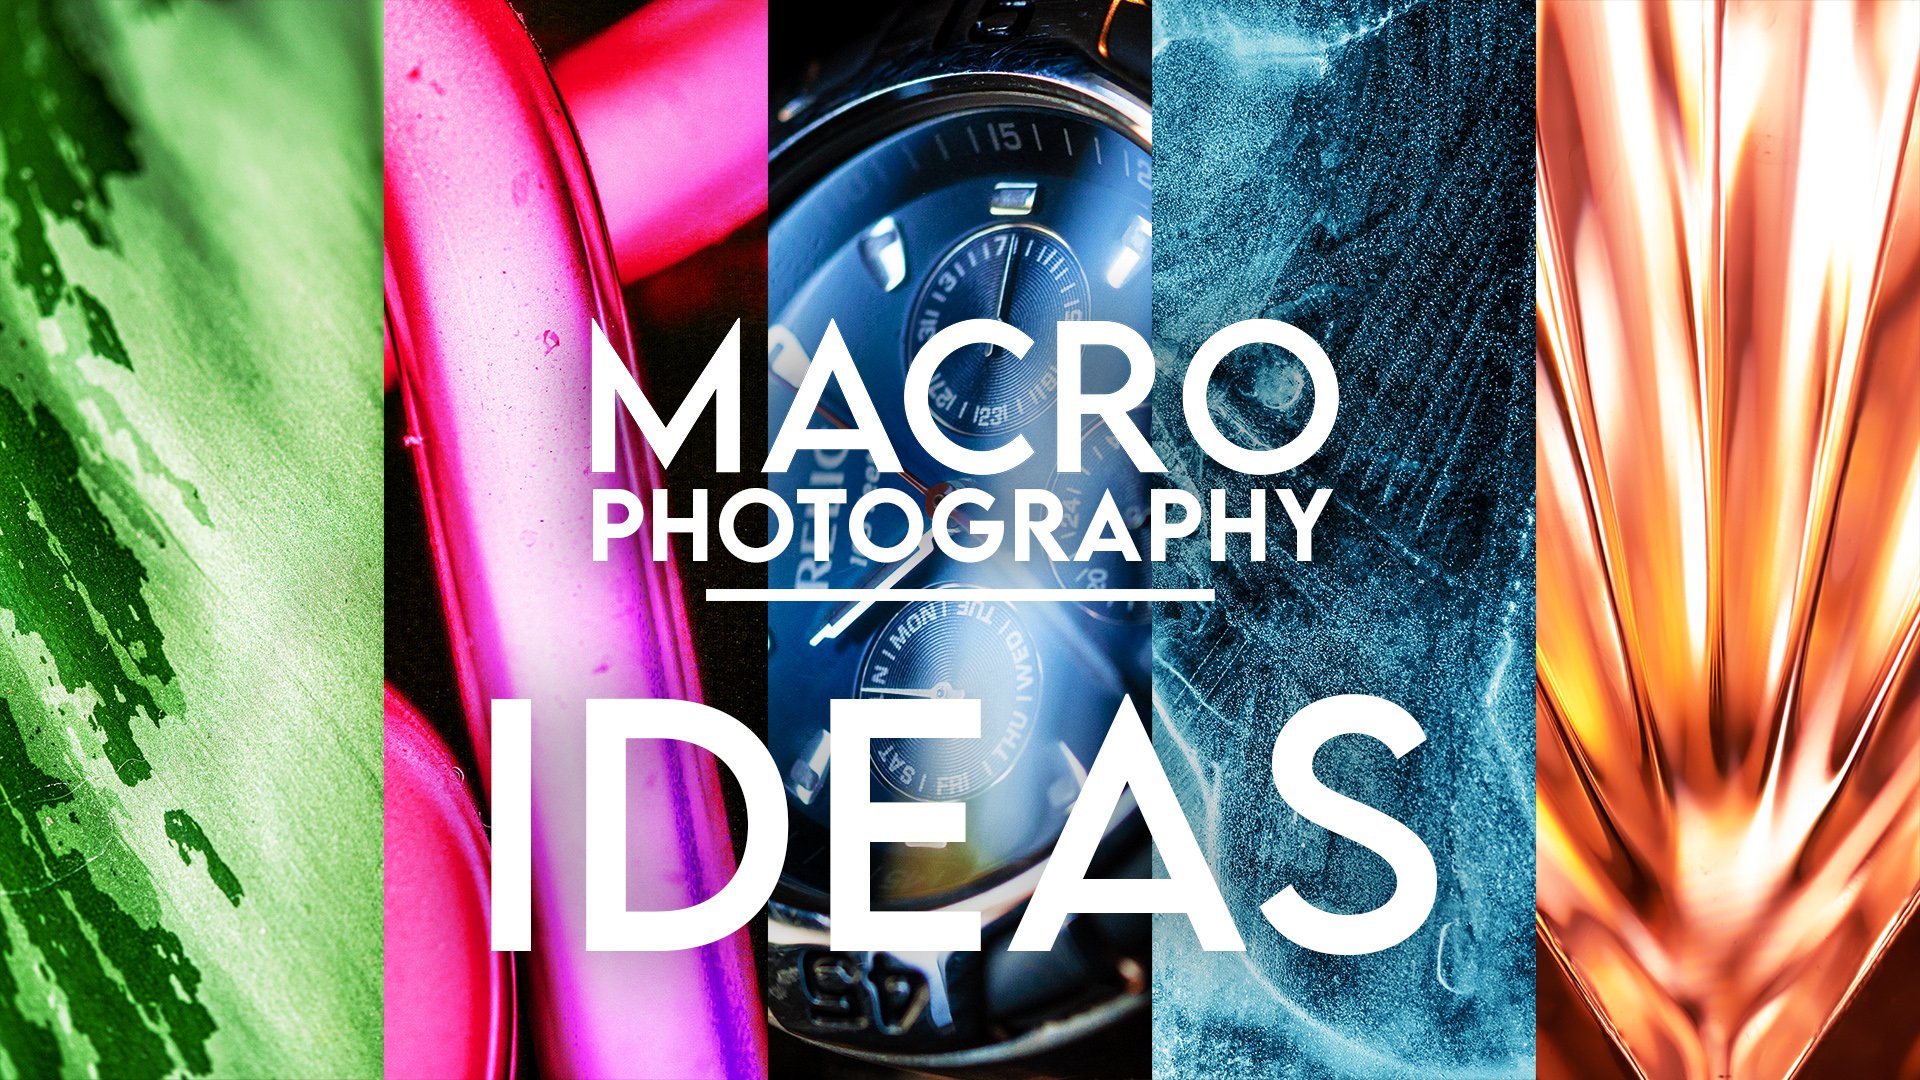 10 Easy Macro Photography Ideas You Can Try at Home